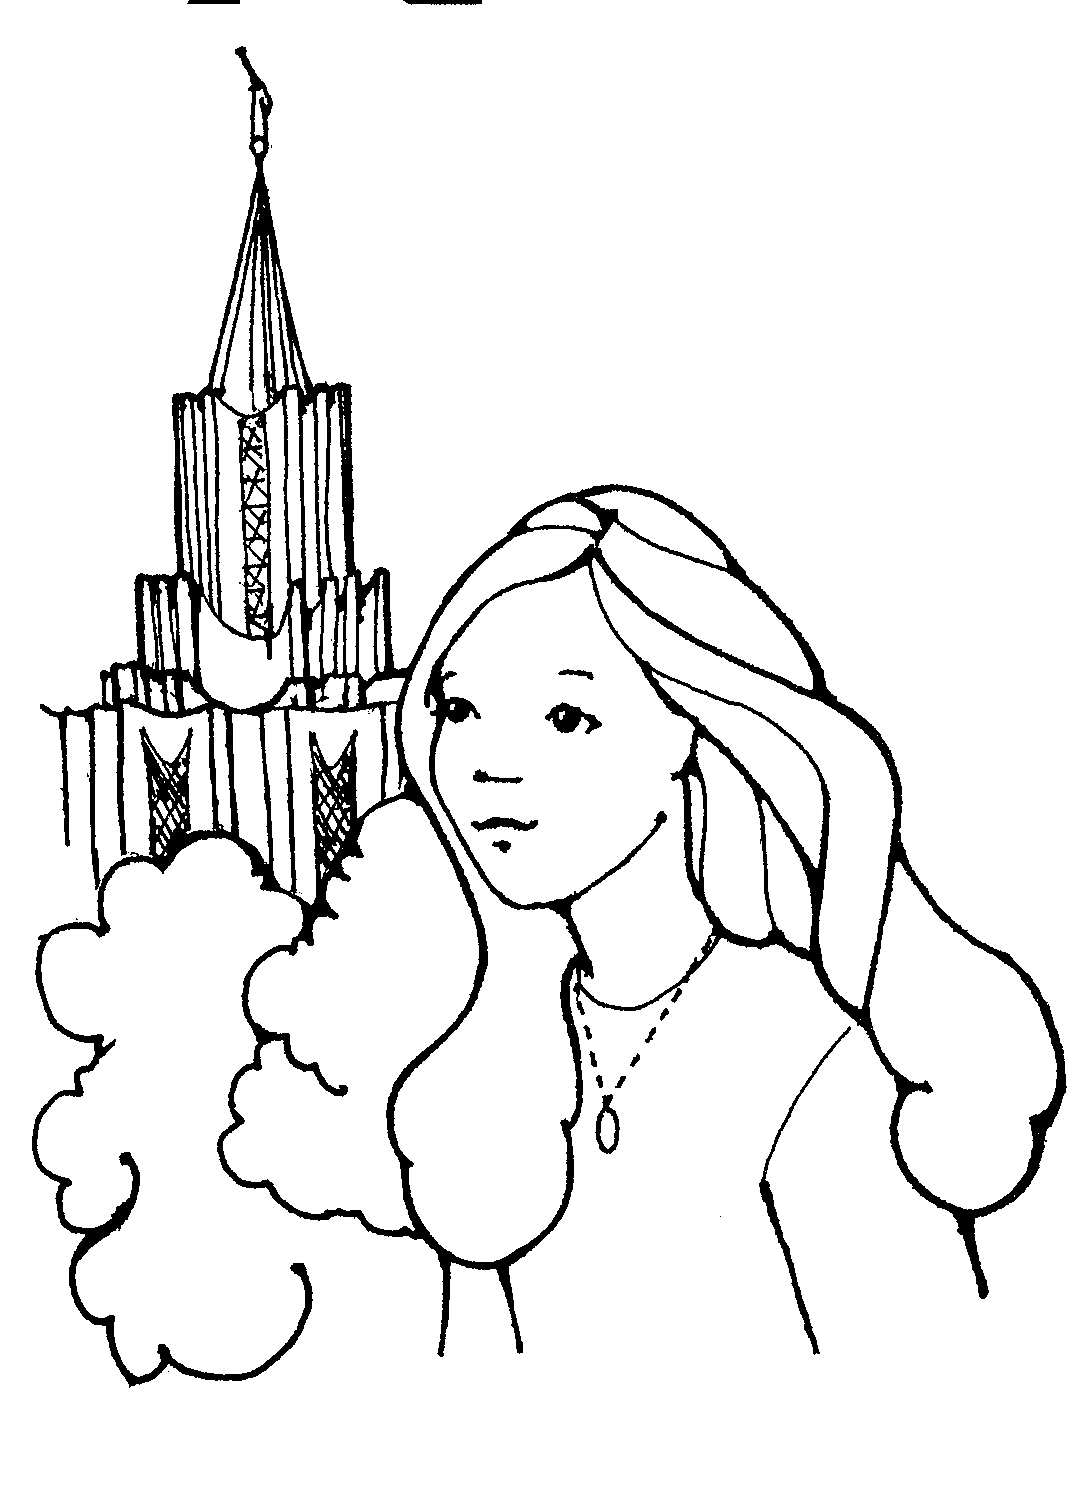 free lds family clipart - photo #32